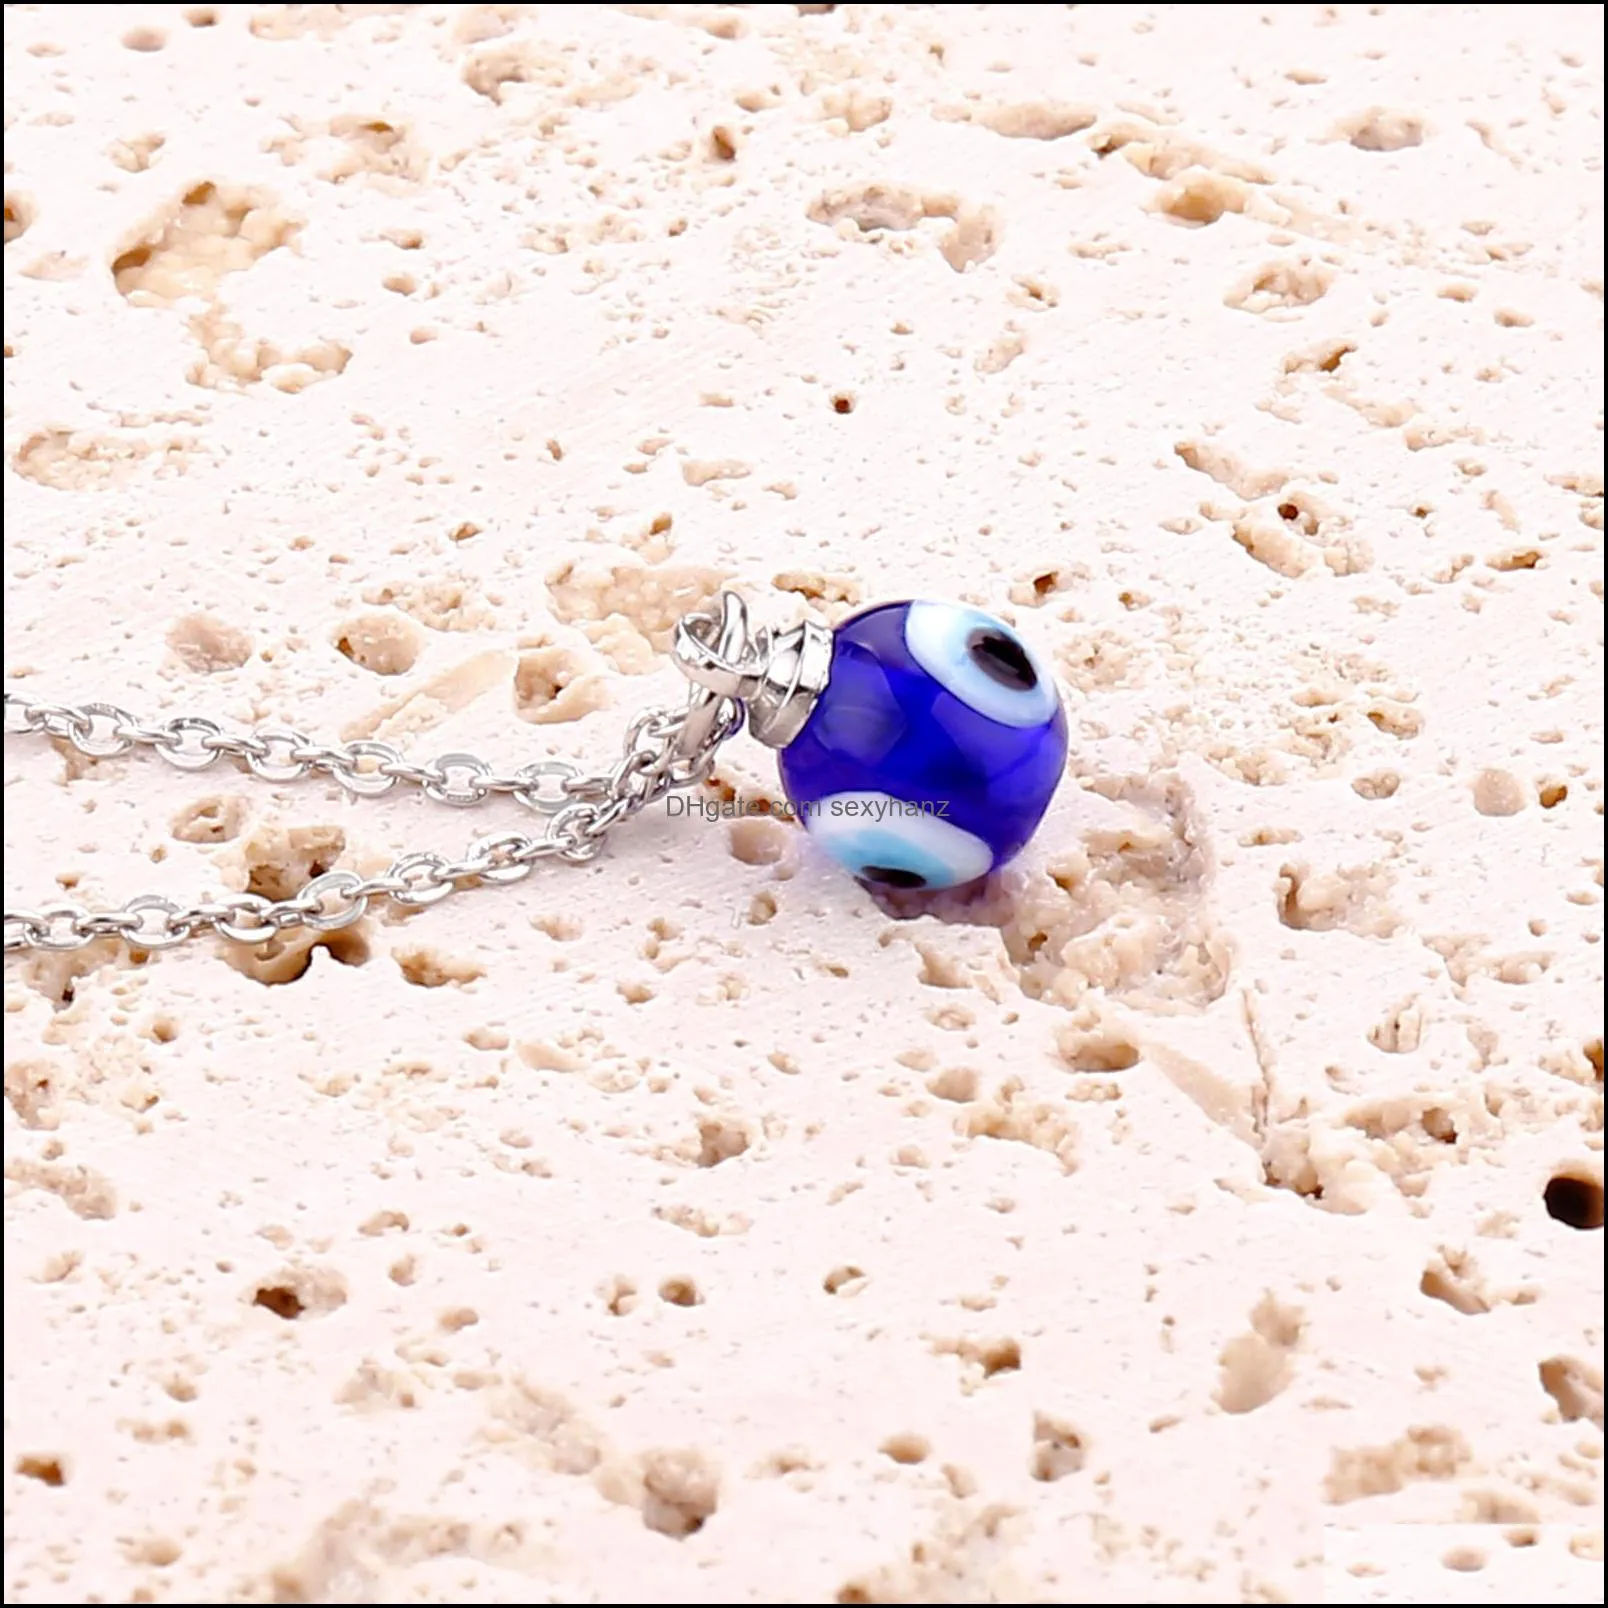 evil eye chain necklace blue eyes amulet pendant necklace ojo turco kabbalah protection delicate jewelry gift for women girls